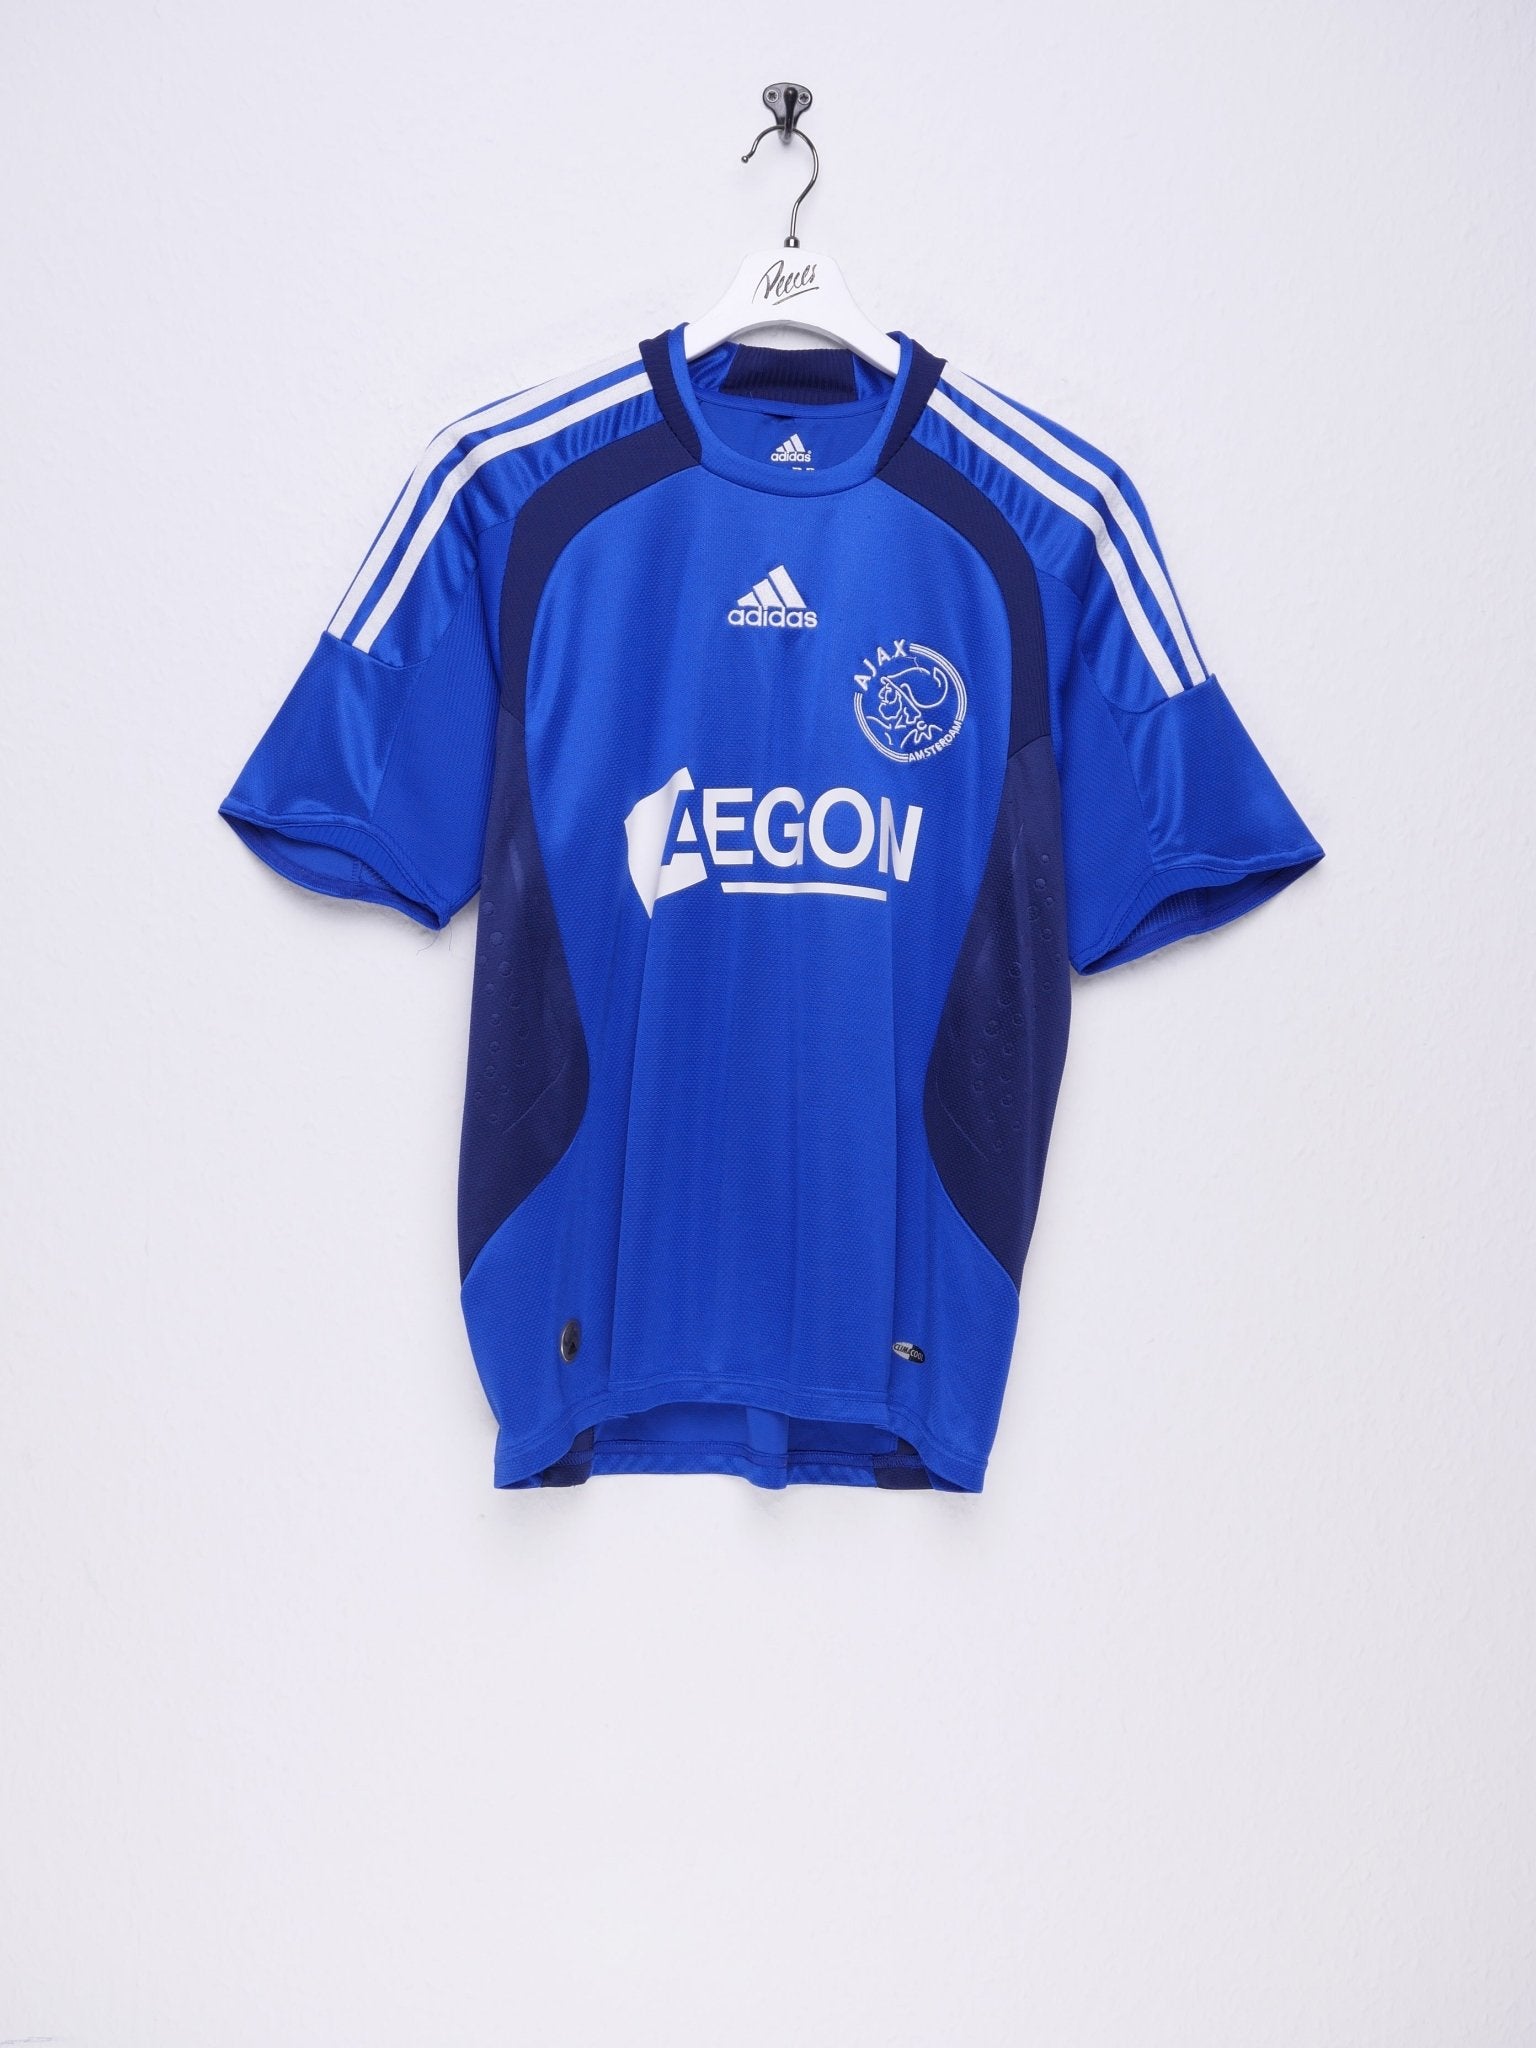 adidas embroidered Middle Logo 'Ajax Amsterdam' Soccr Jersey Shirt - Peeces